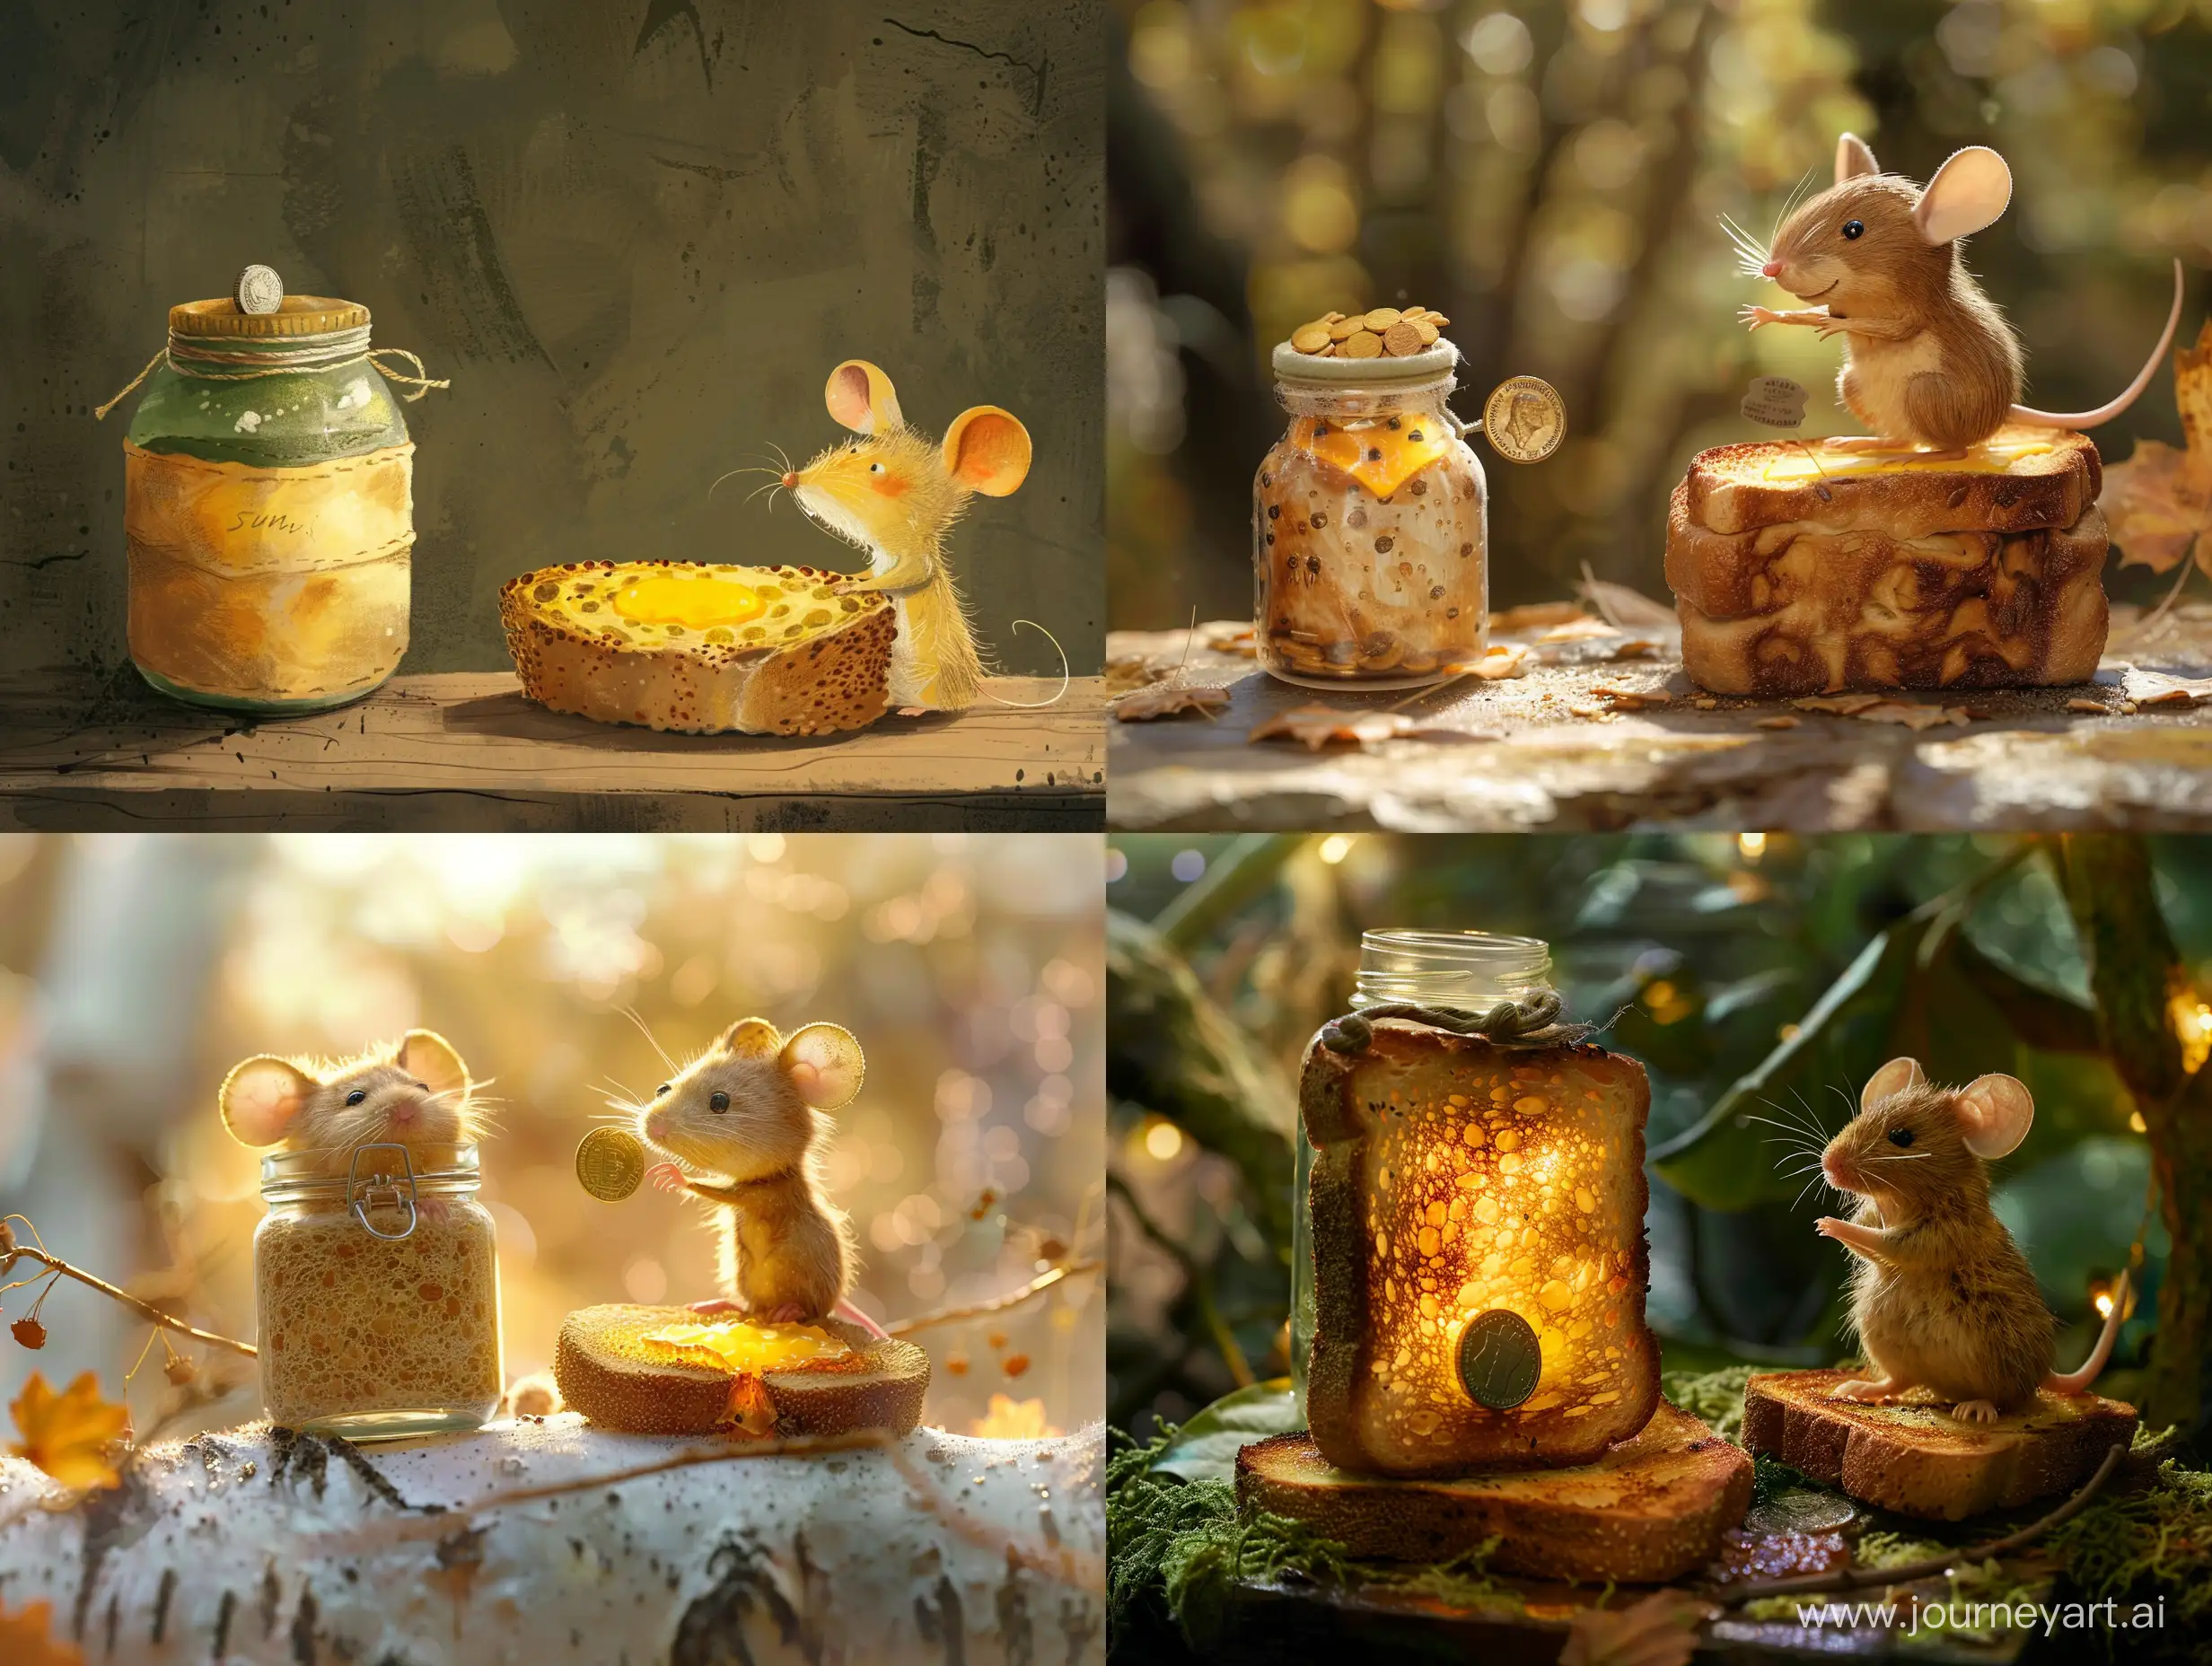 Artistic-Composition-Coin-on-Toast-with-Jar-and-Mouse